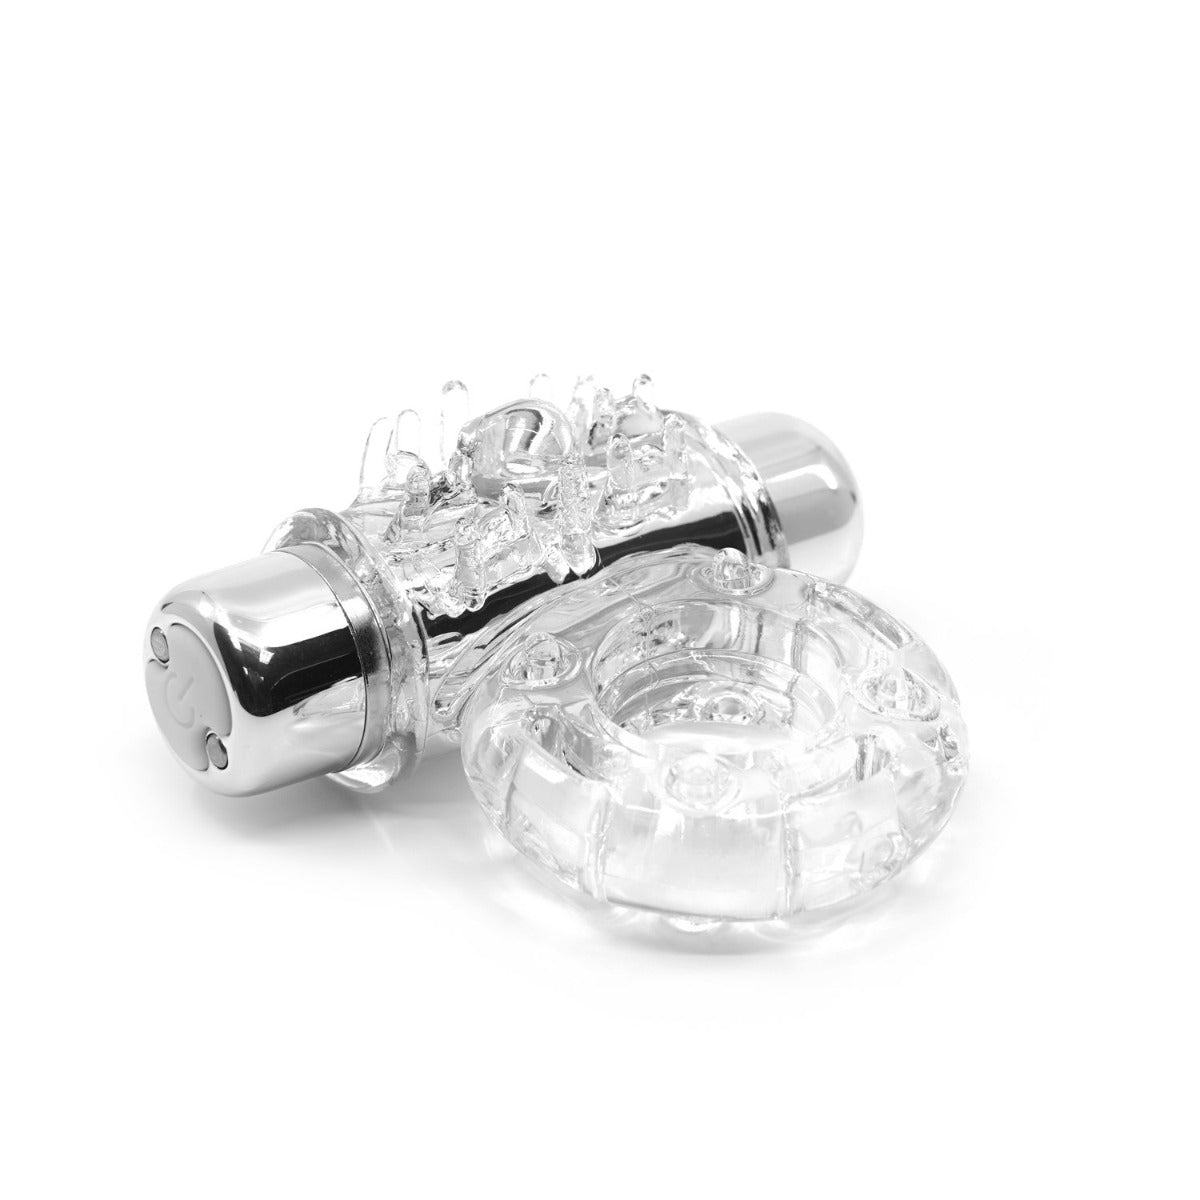 Vibrating Cock Rings SENSUELLE BULLET RING 7 FUNCTION COCKRING - CLEAR   